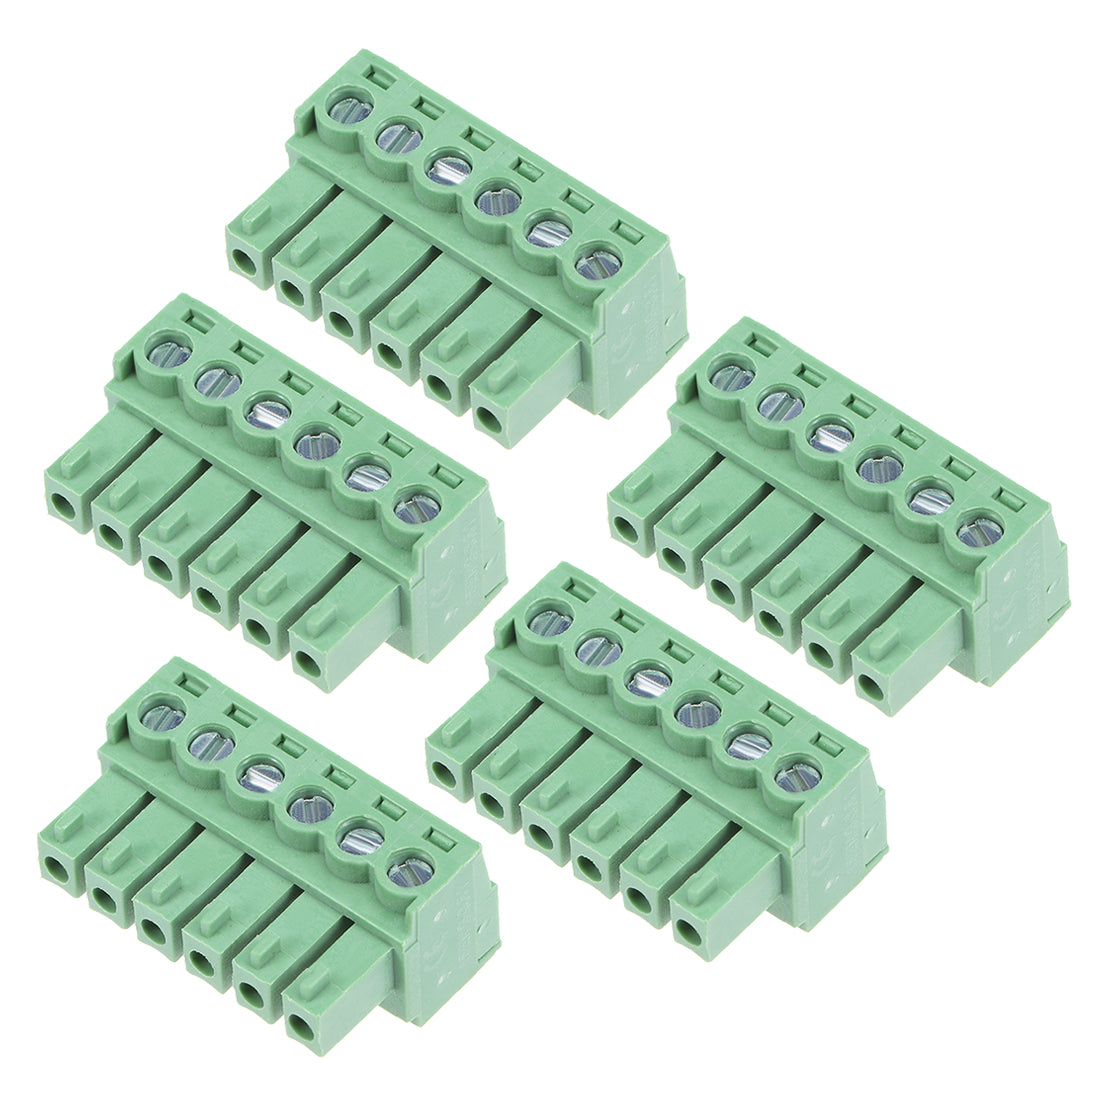 uxcell Uxcell 5Pcs AC300V 10A 3.81mm Pitch 6P Flat Angle Needle Seat Insert-In PCB Terminal Block Connector green